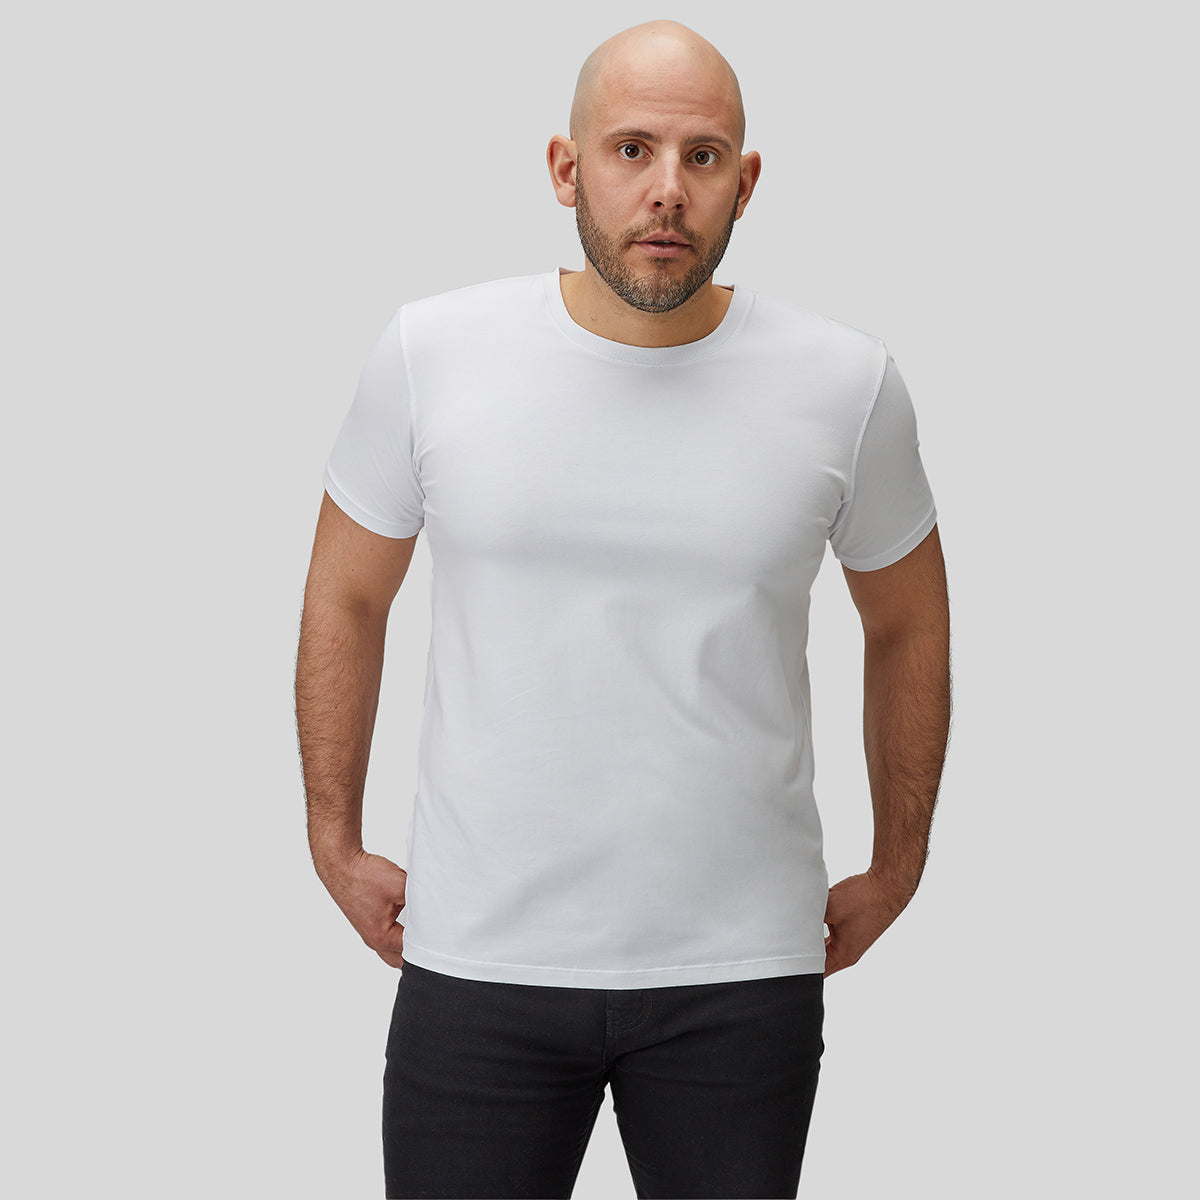 Model with white t-shirt front view